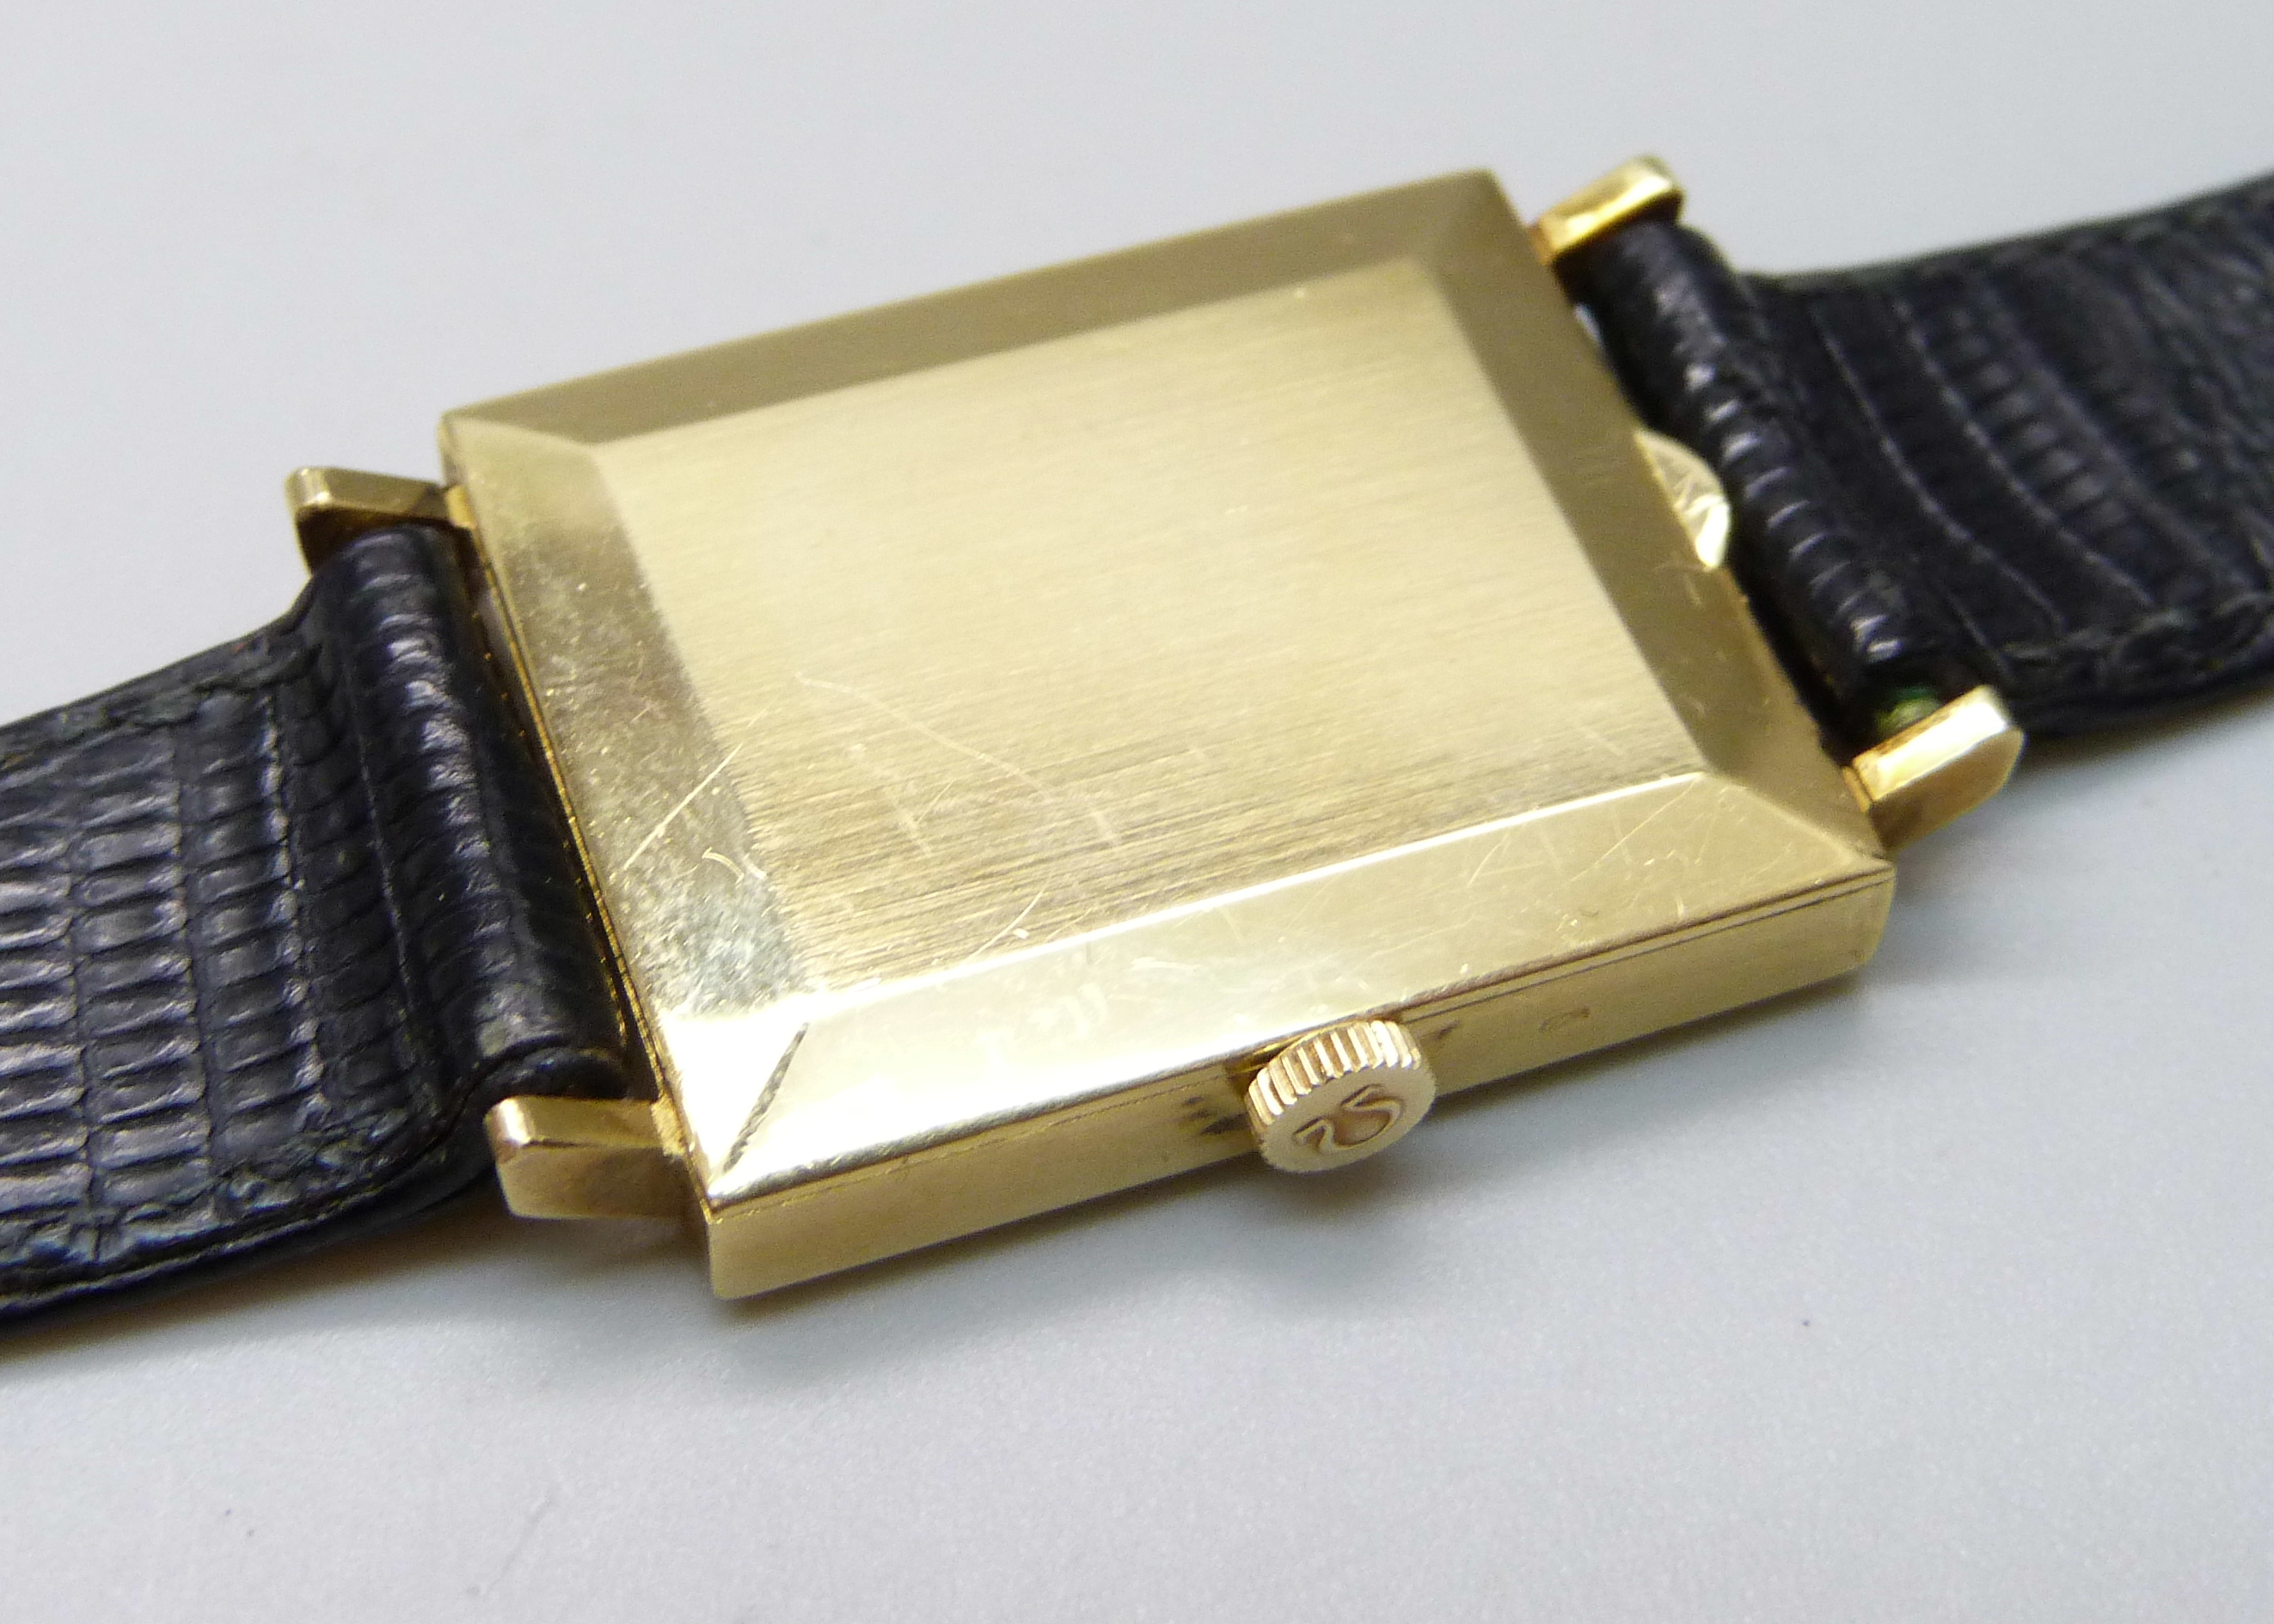 A gentleman's 18ct gold cased Omega dress wristwatch on a leather watch strap with Omega buckle, - Image 6 of 8